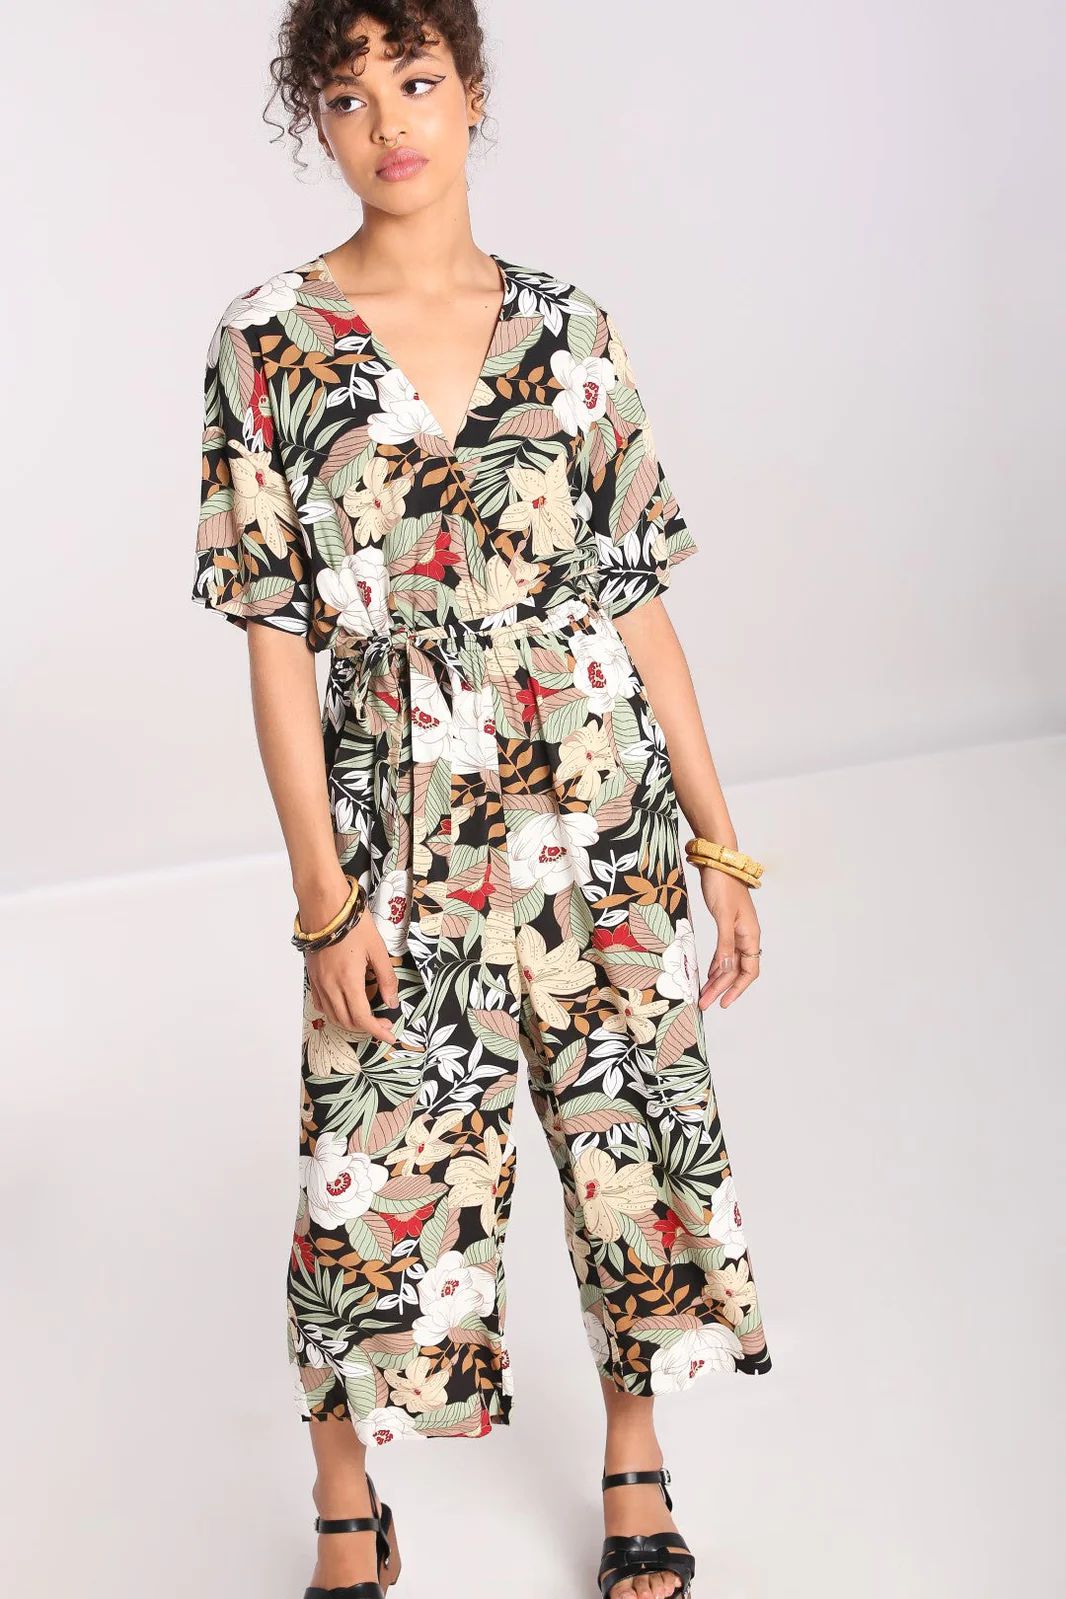 PS50251bb_combinaison-jumpsuit-hell-bunny-pinup-50-s-retro-adelaida